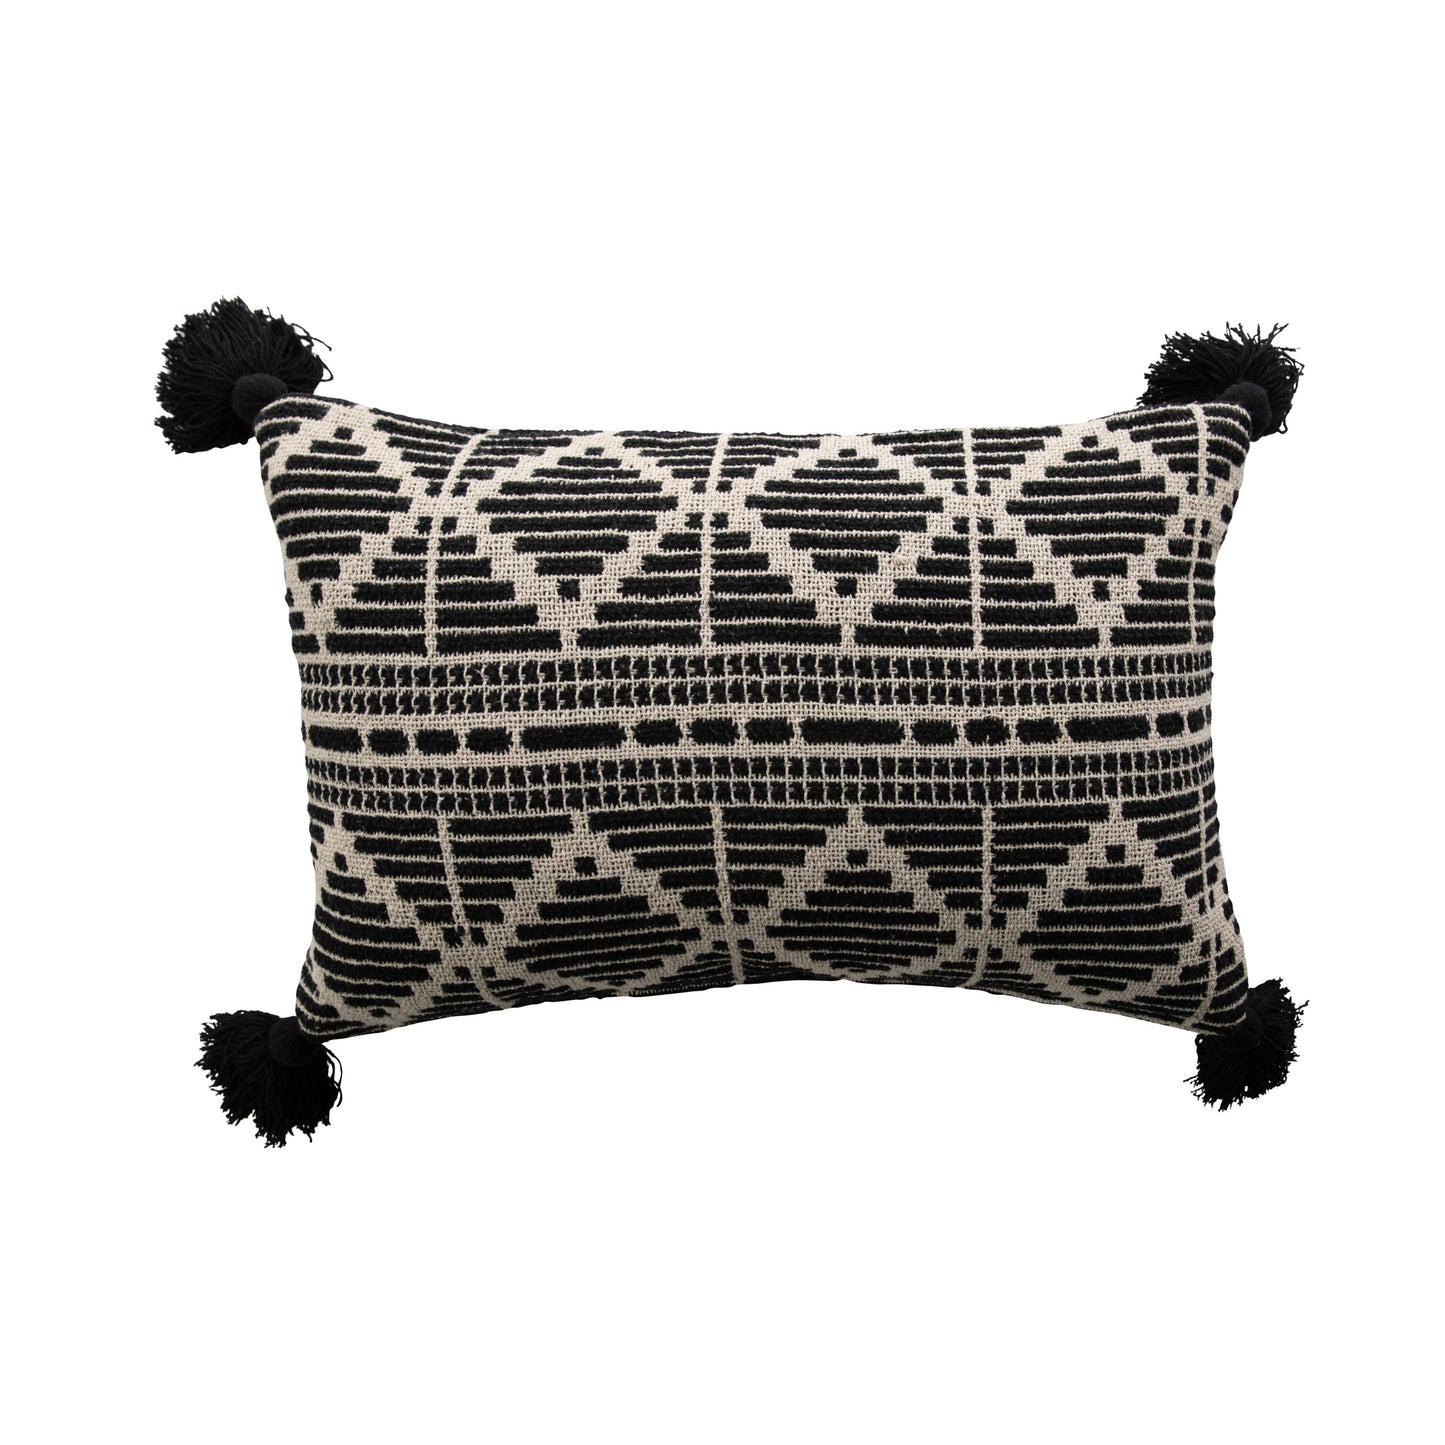 Lumbar Pillow - Black and Beige with Tassels